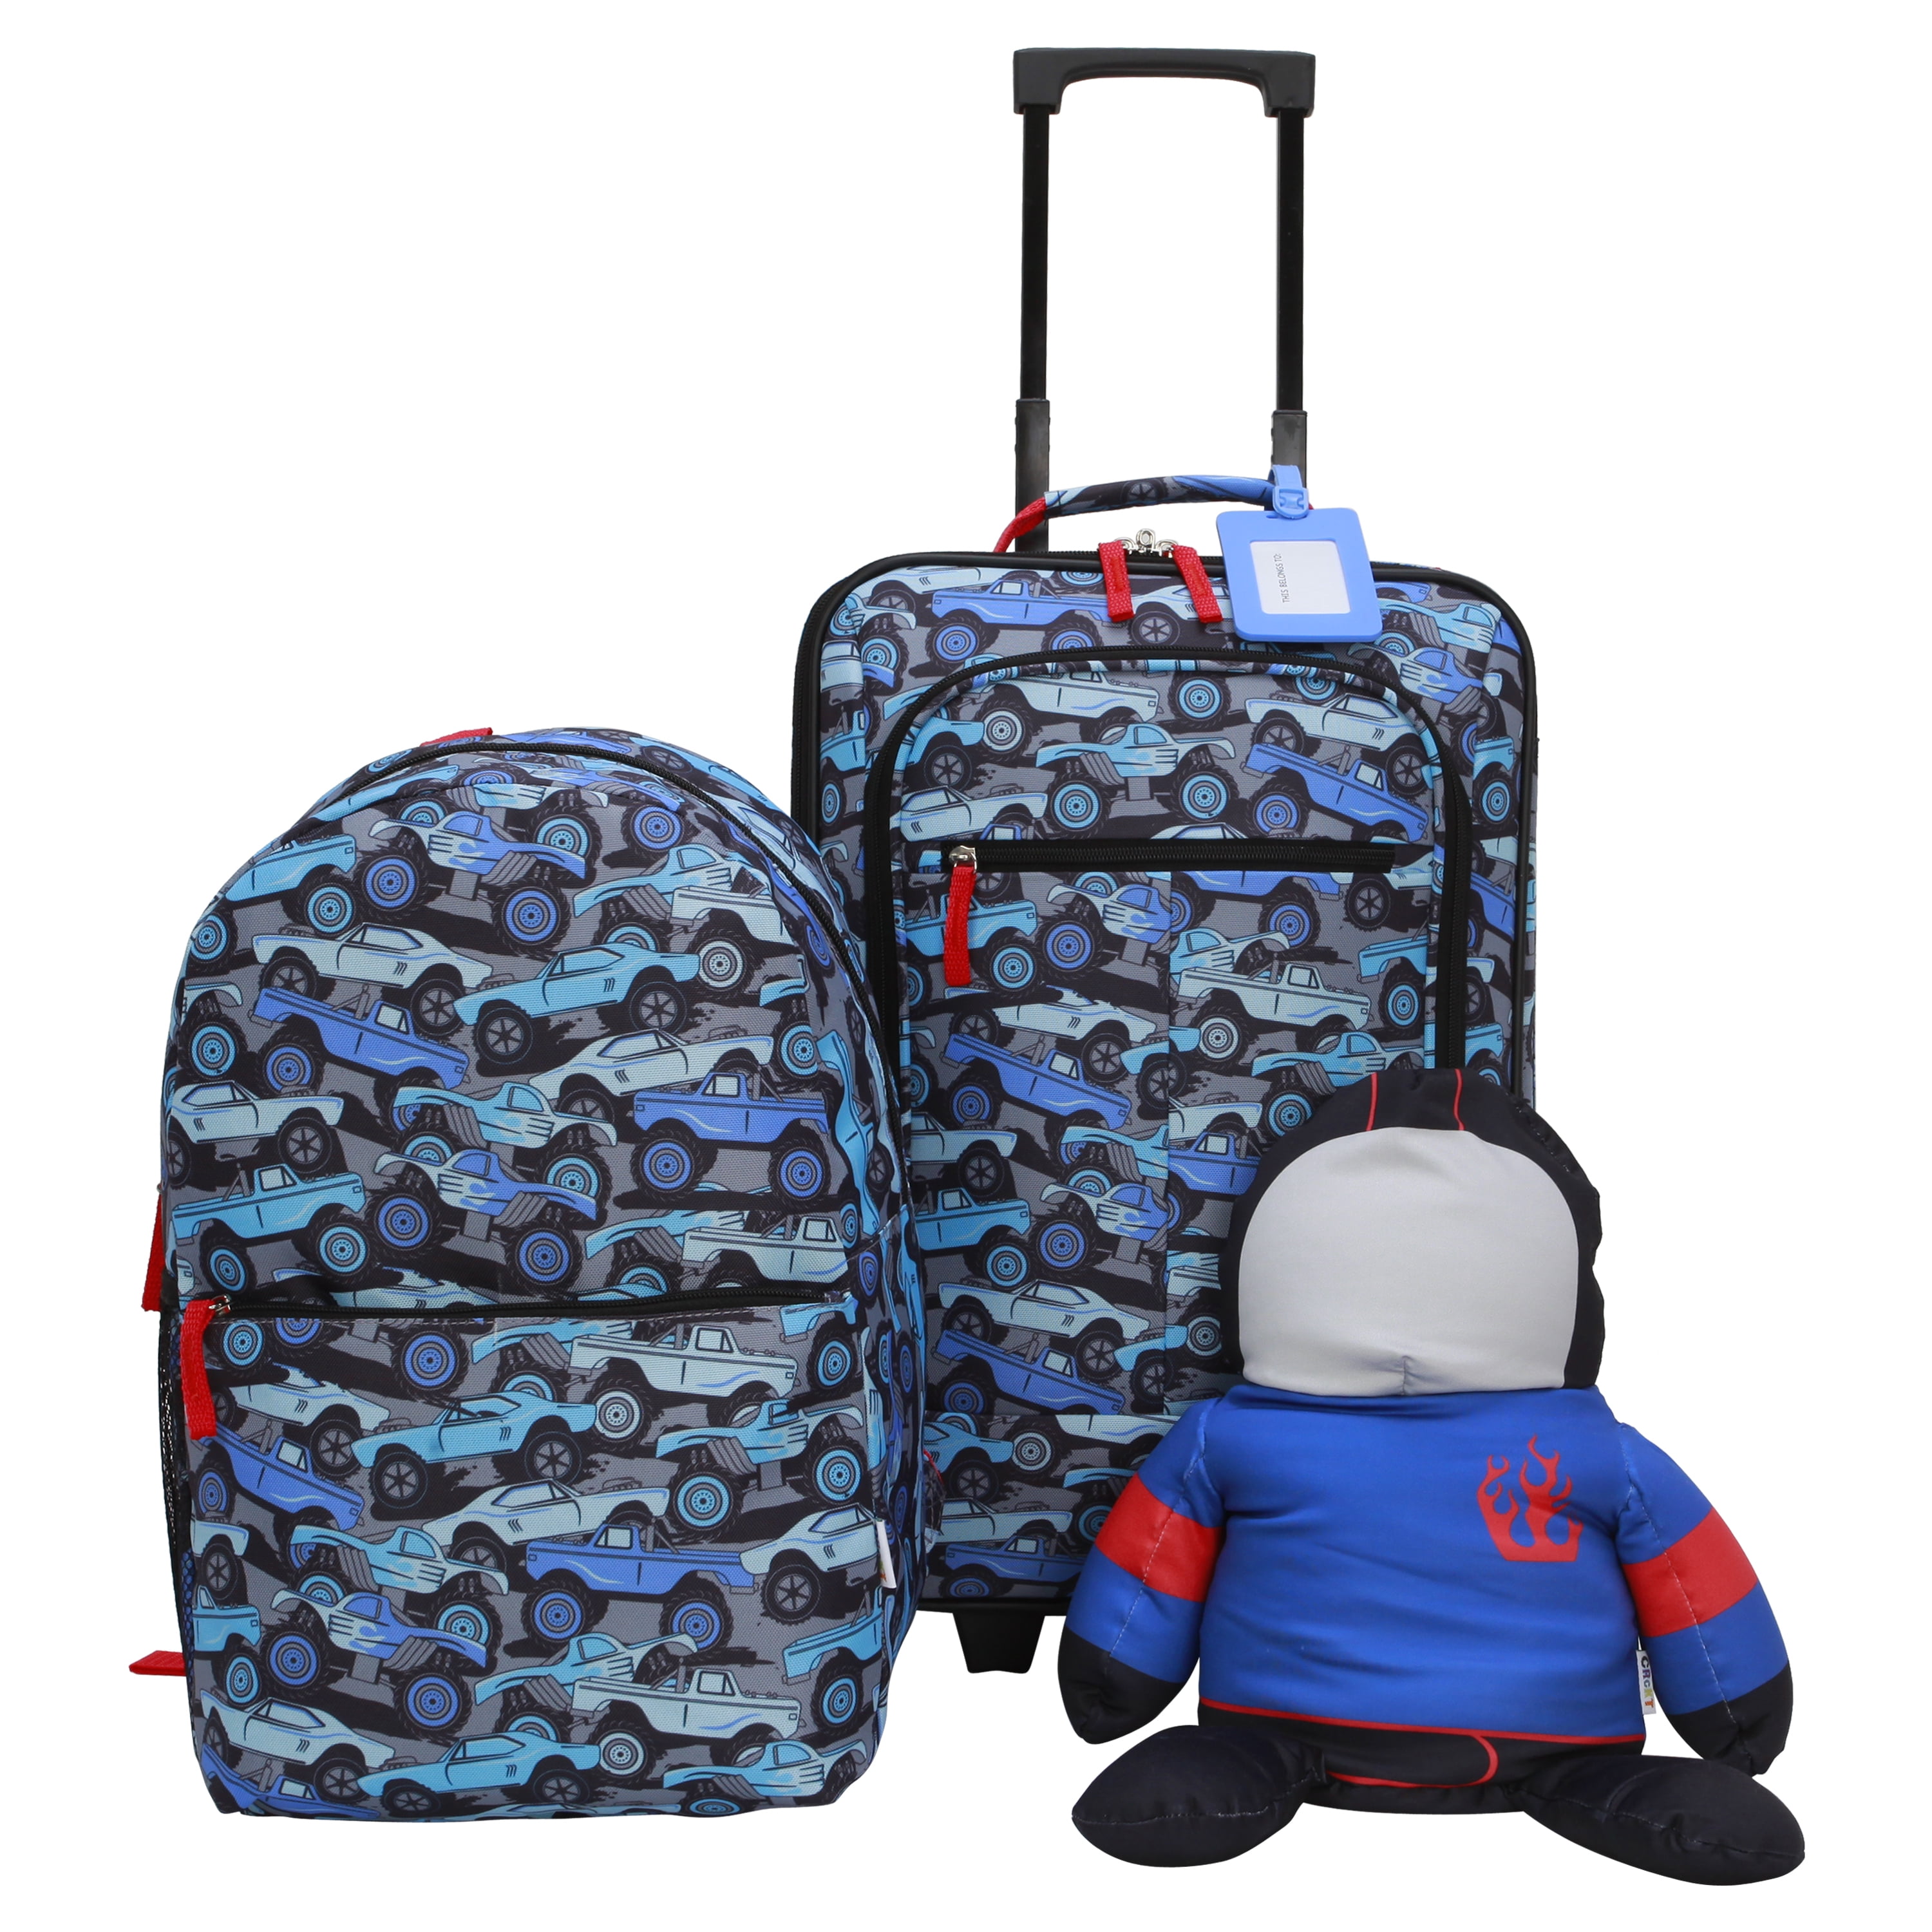 Gift for Boys and Girls Toddlers Children 12 & 18 Kids Carry On Suitcase Set w/ Multi-directional Wheels Large Capacity Travel Rolling Luggage Blue Fireflowery Kids Luggage Set 